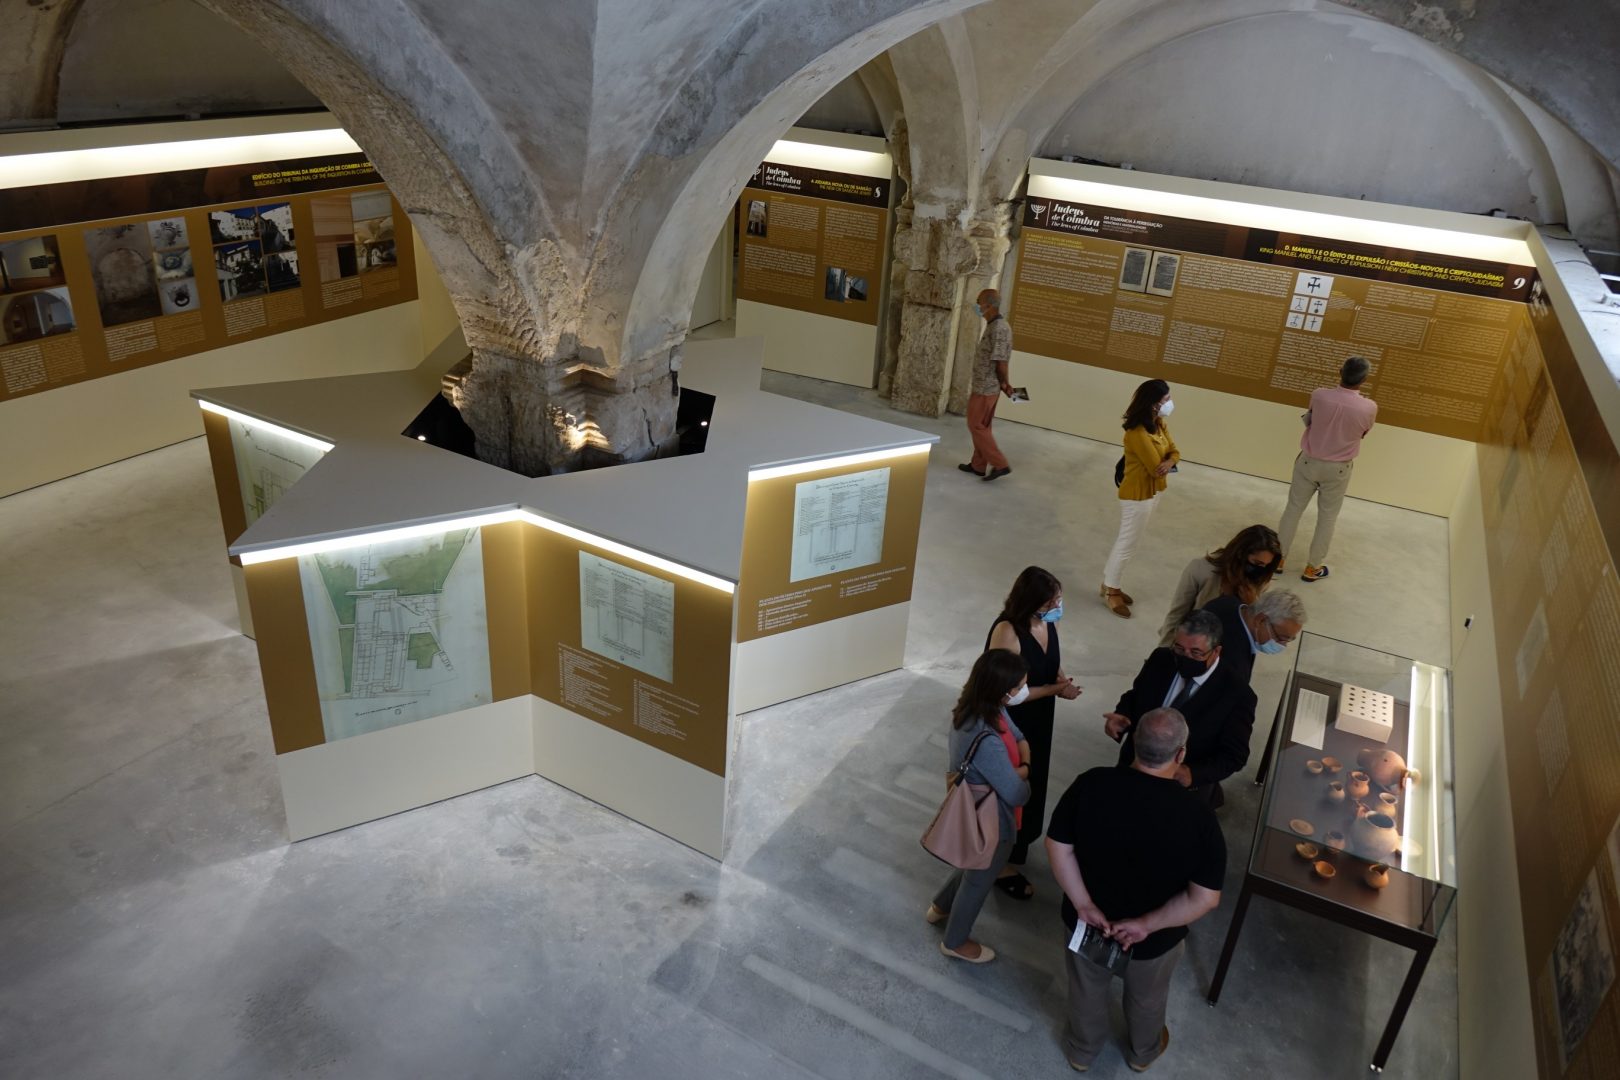 Coimbra has a permanent exhibition about the Inquisition